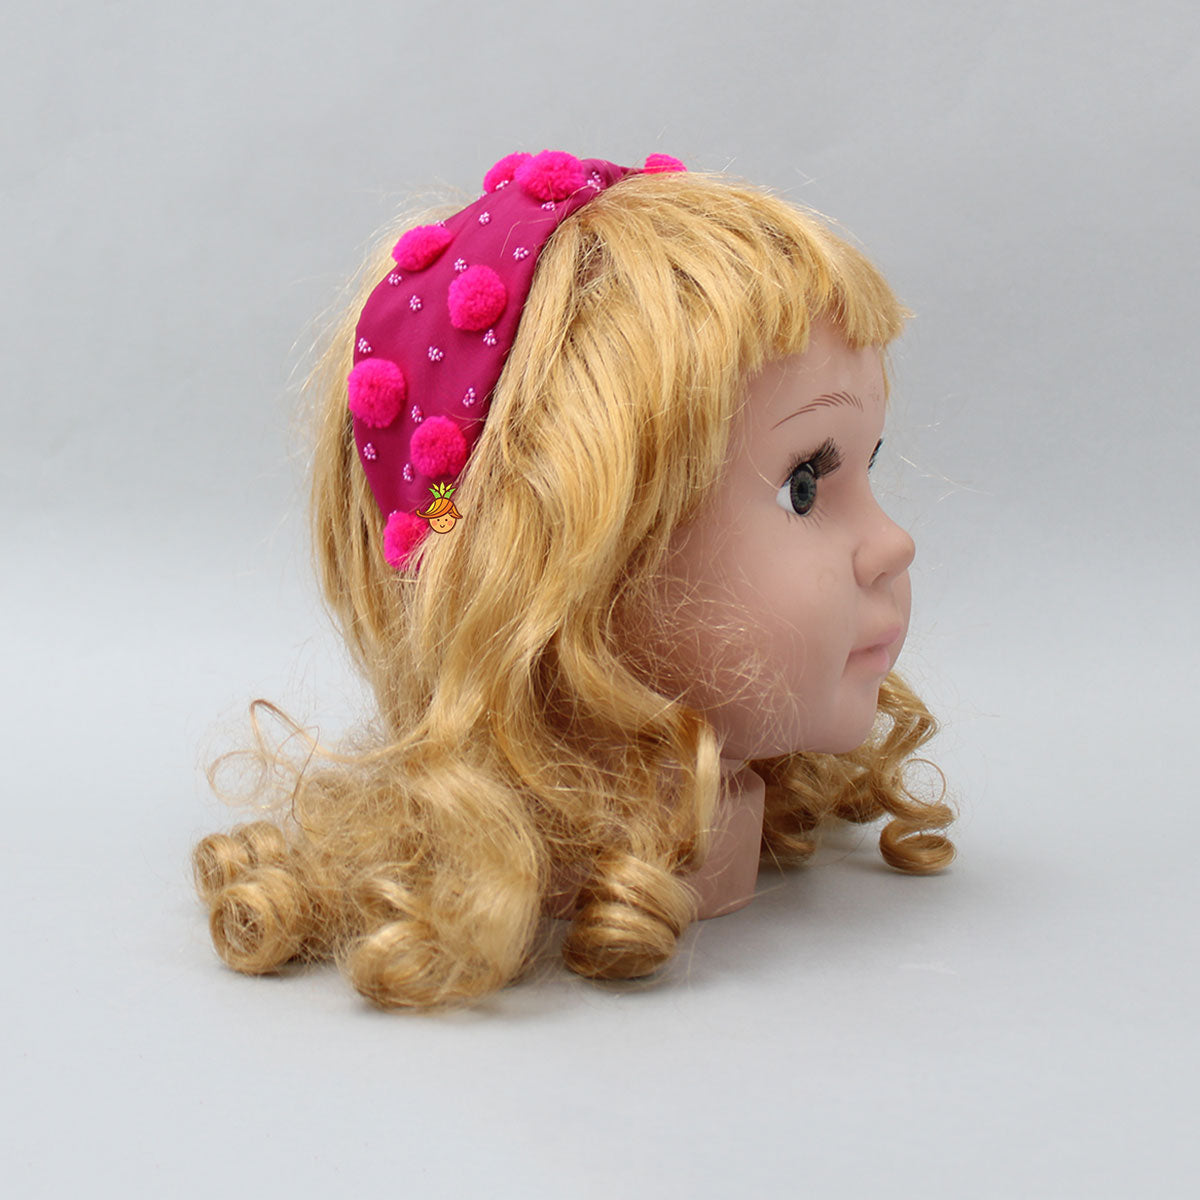 Cute Pom Poms And Beads Detailed Pink Hair Band